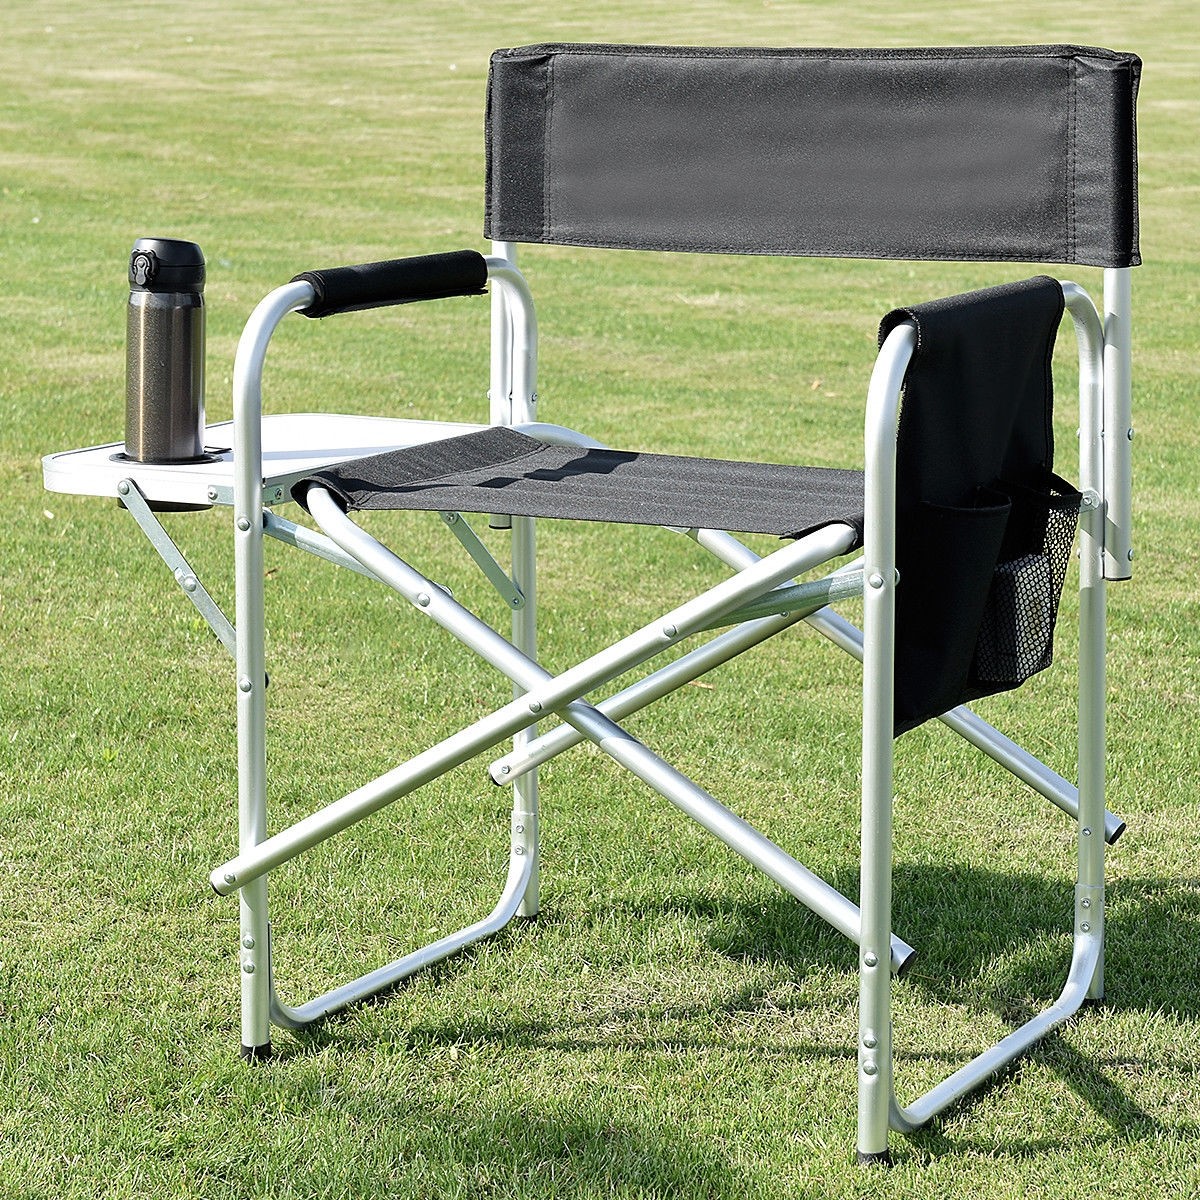 Folding Outdoor Camping Chair With Cup Holder